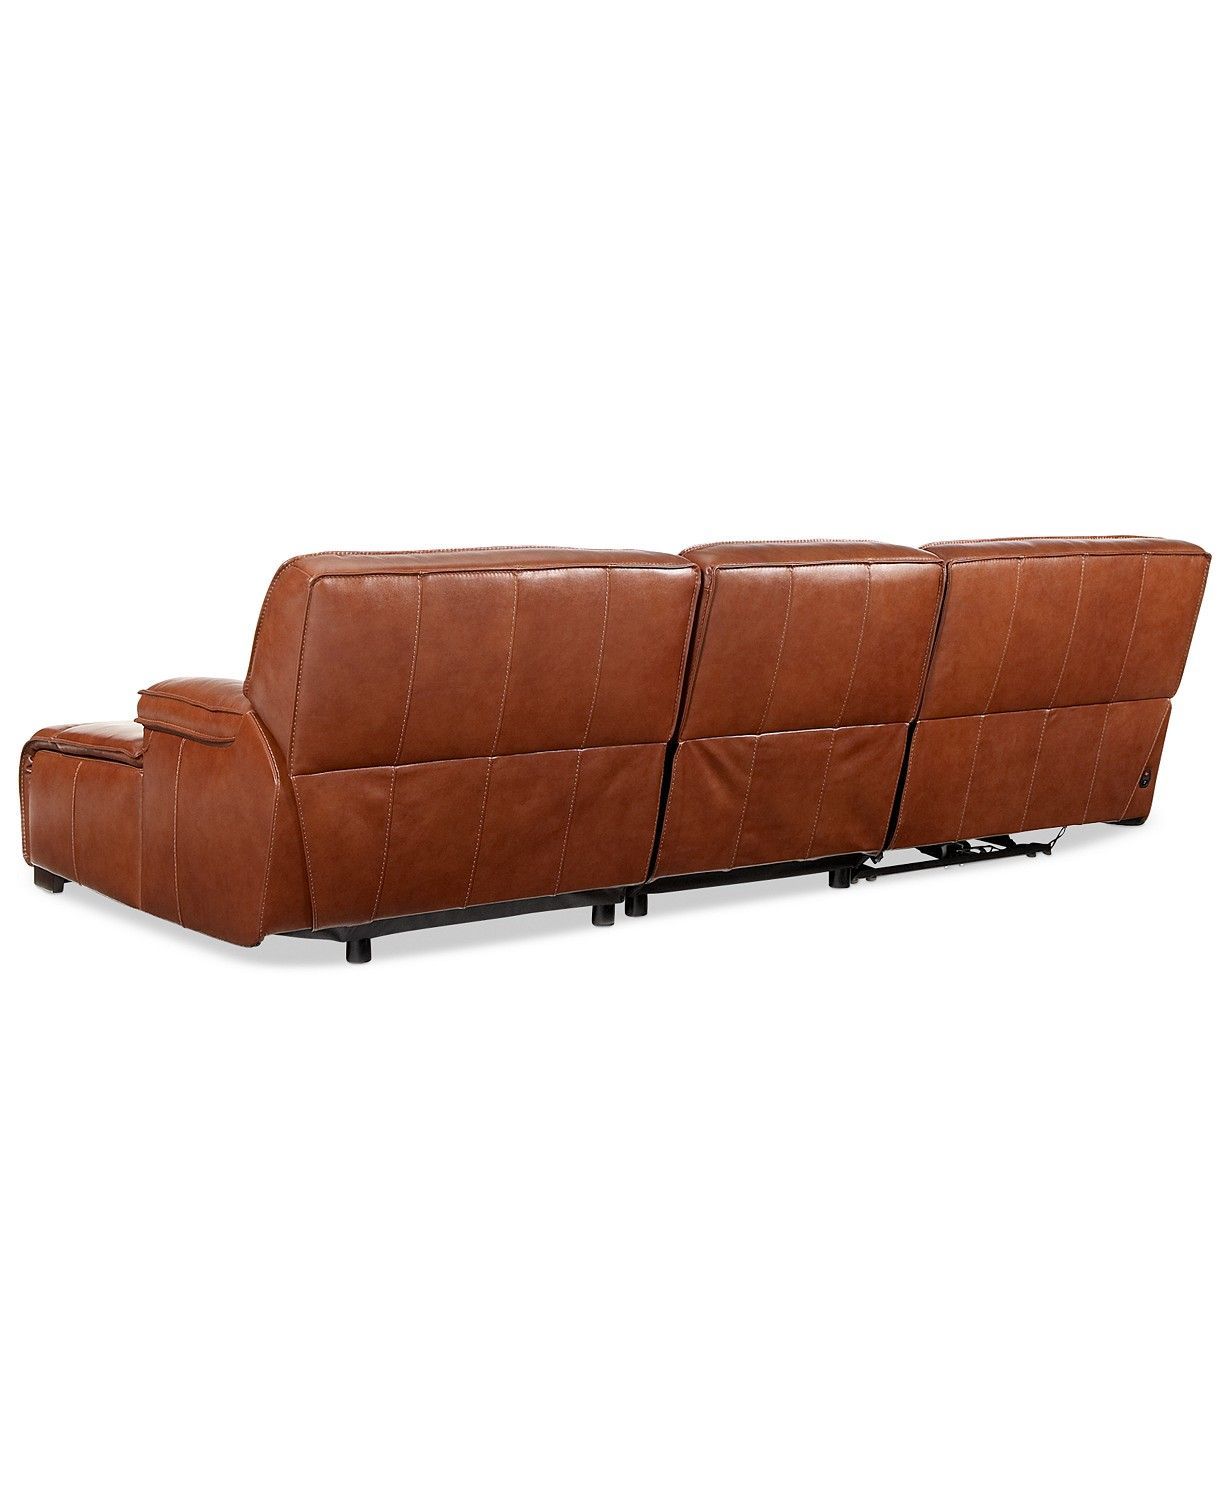 Furniture Beckett 3 Pc Leather Sectional Sofa With Chaise Pertaining To 3Pc Miles Leather Sectional Sofas With Chaise (View 8 of 15)